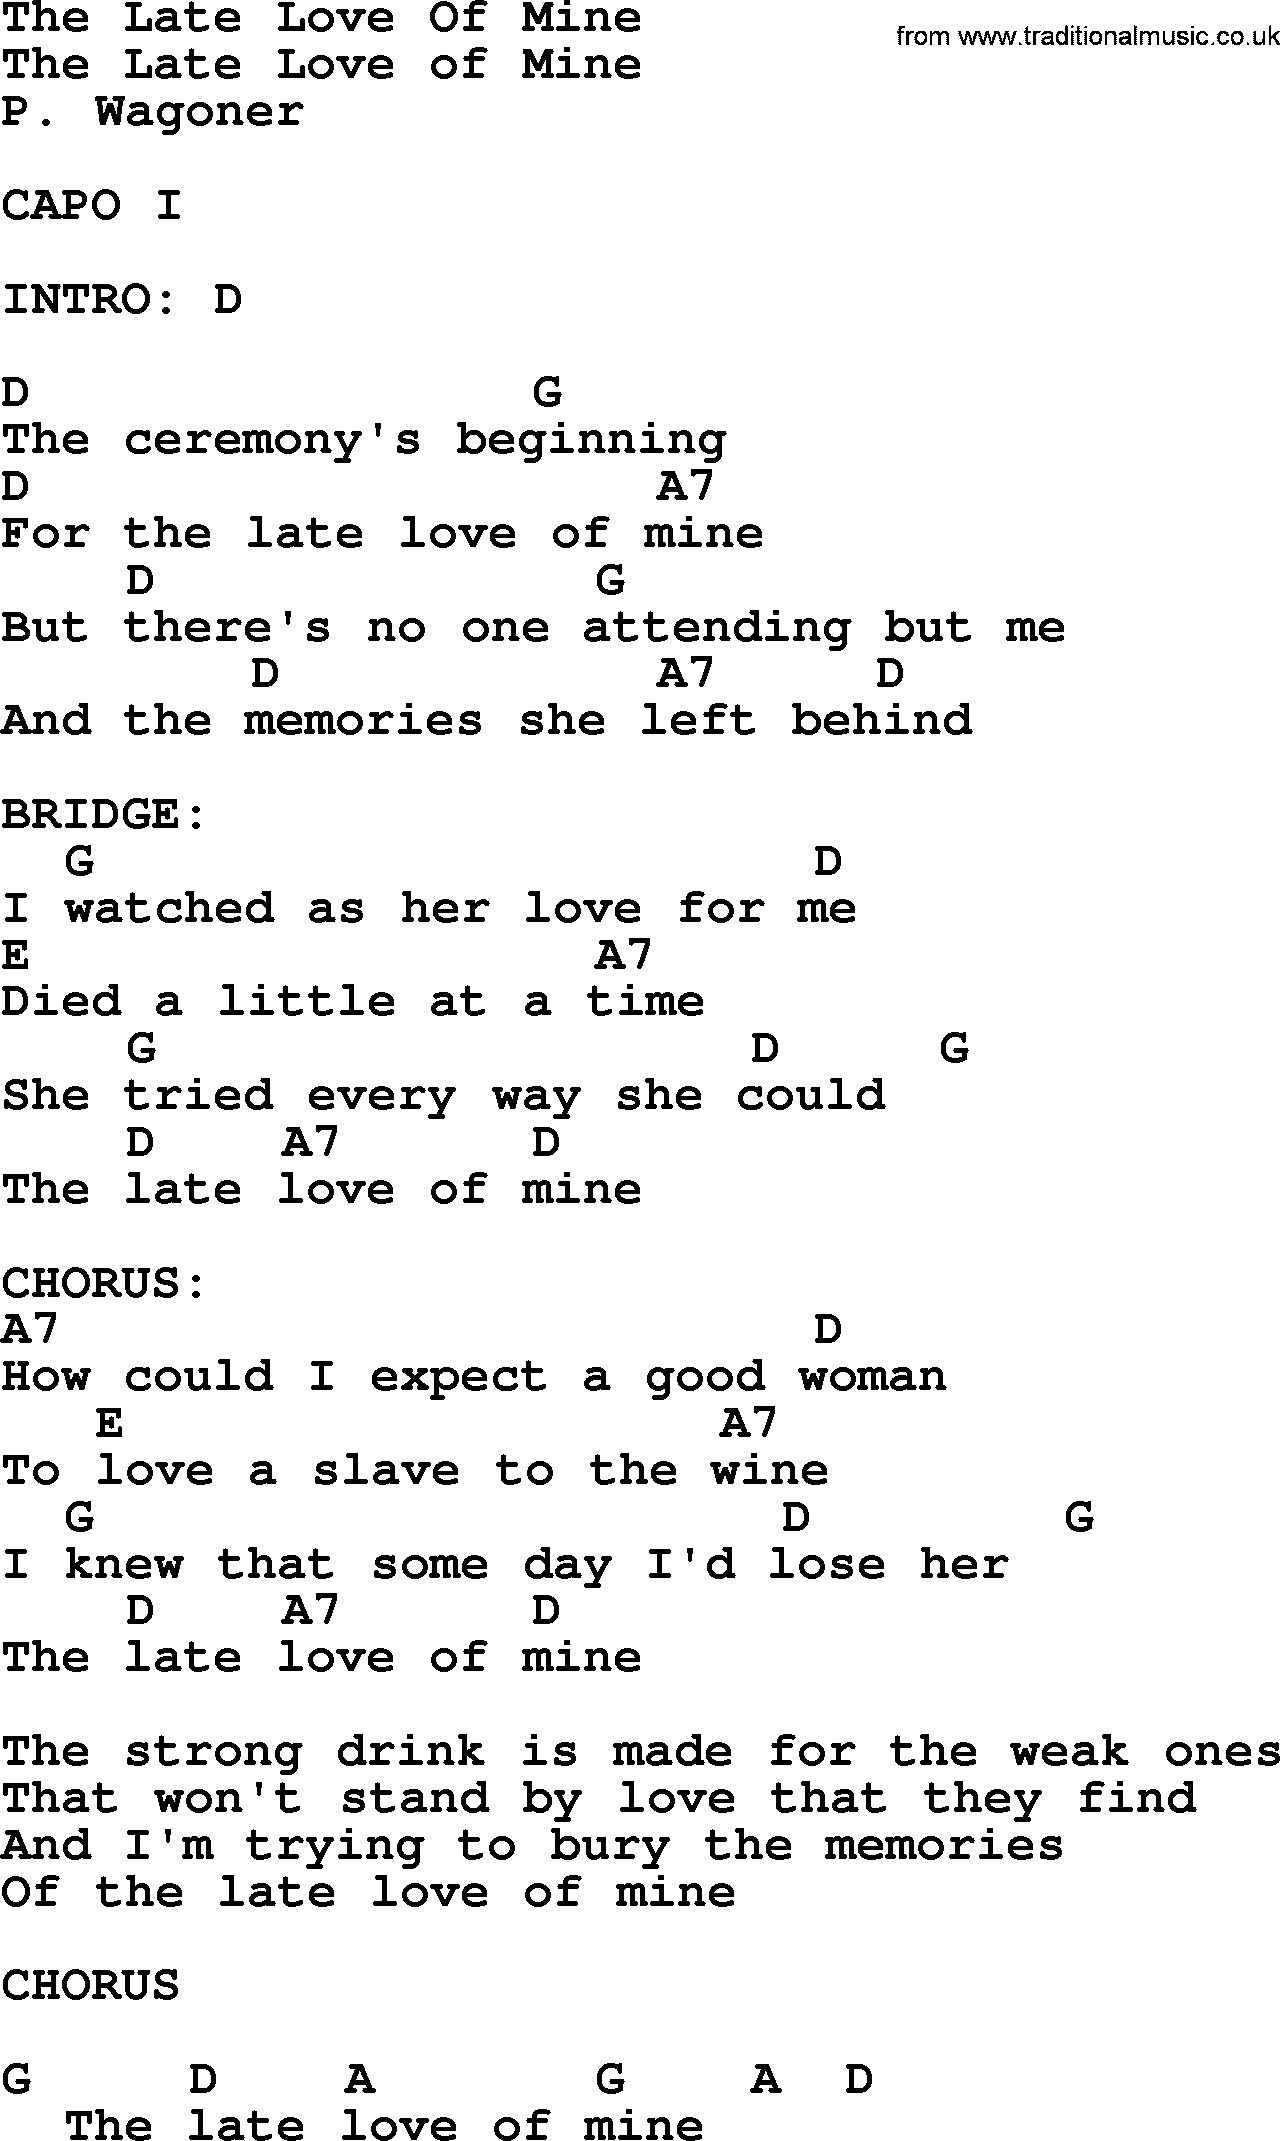 Bluegrass song: The Late Love Of Mine, lyrics and chords